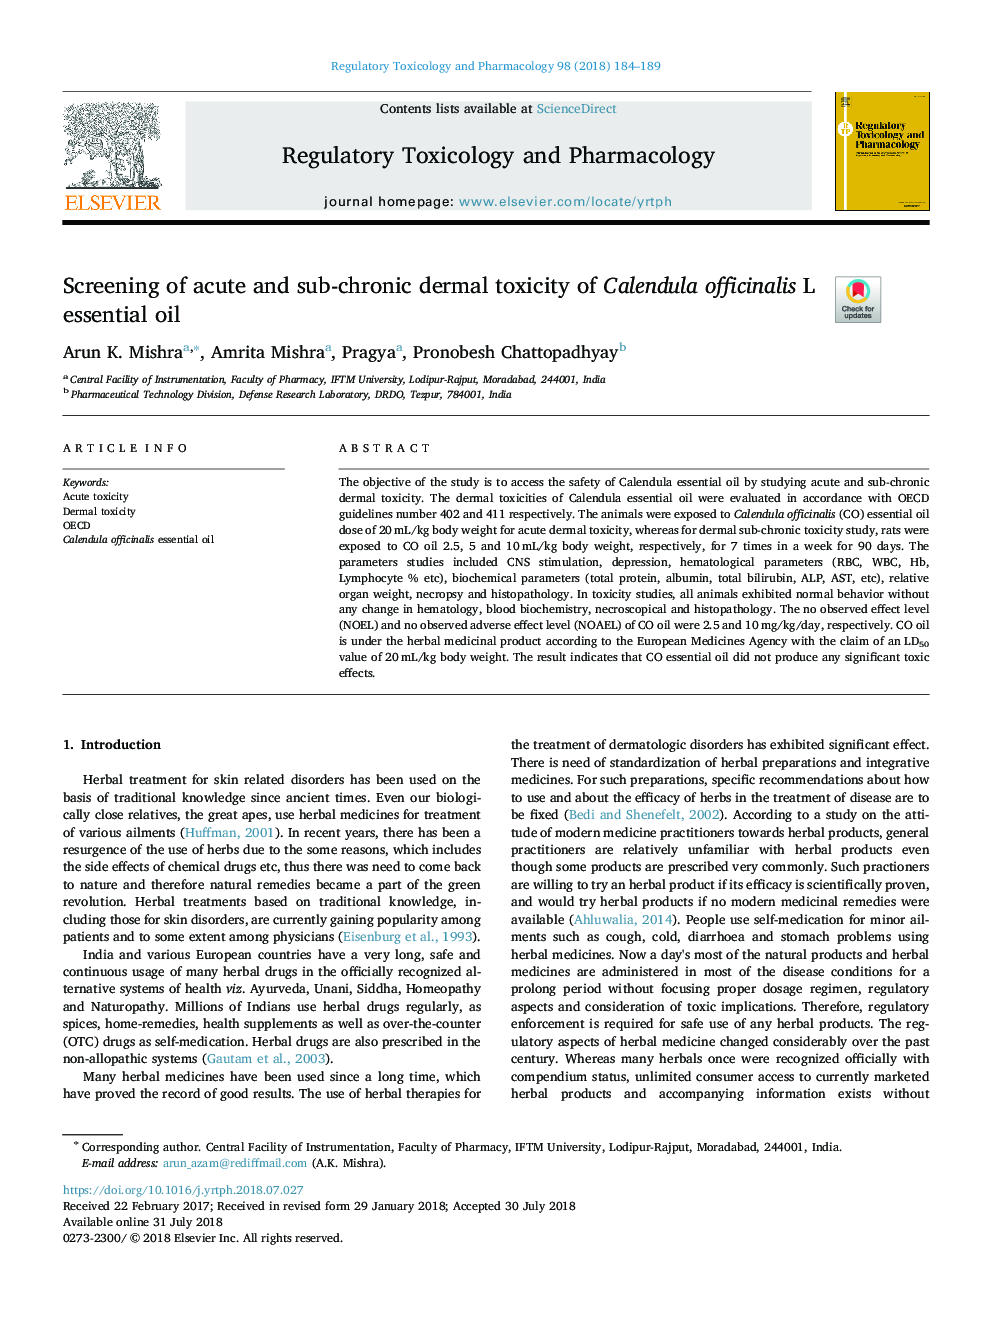 Screening of acute and sub-chronic dermal toxicity of Calendula officinalis L essential oil